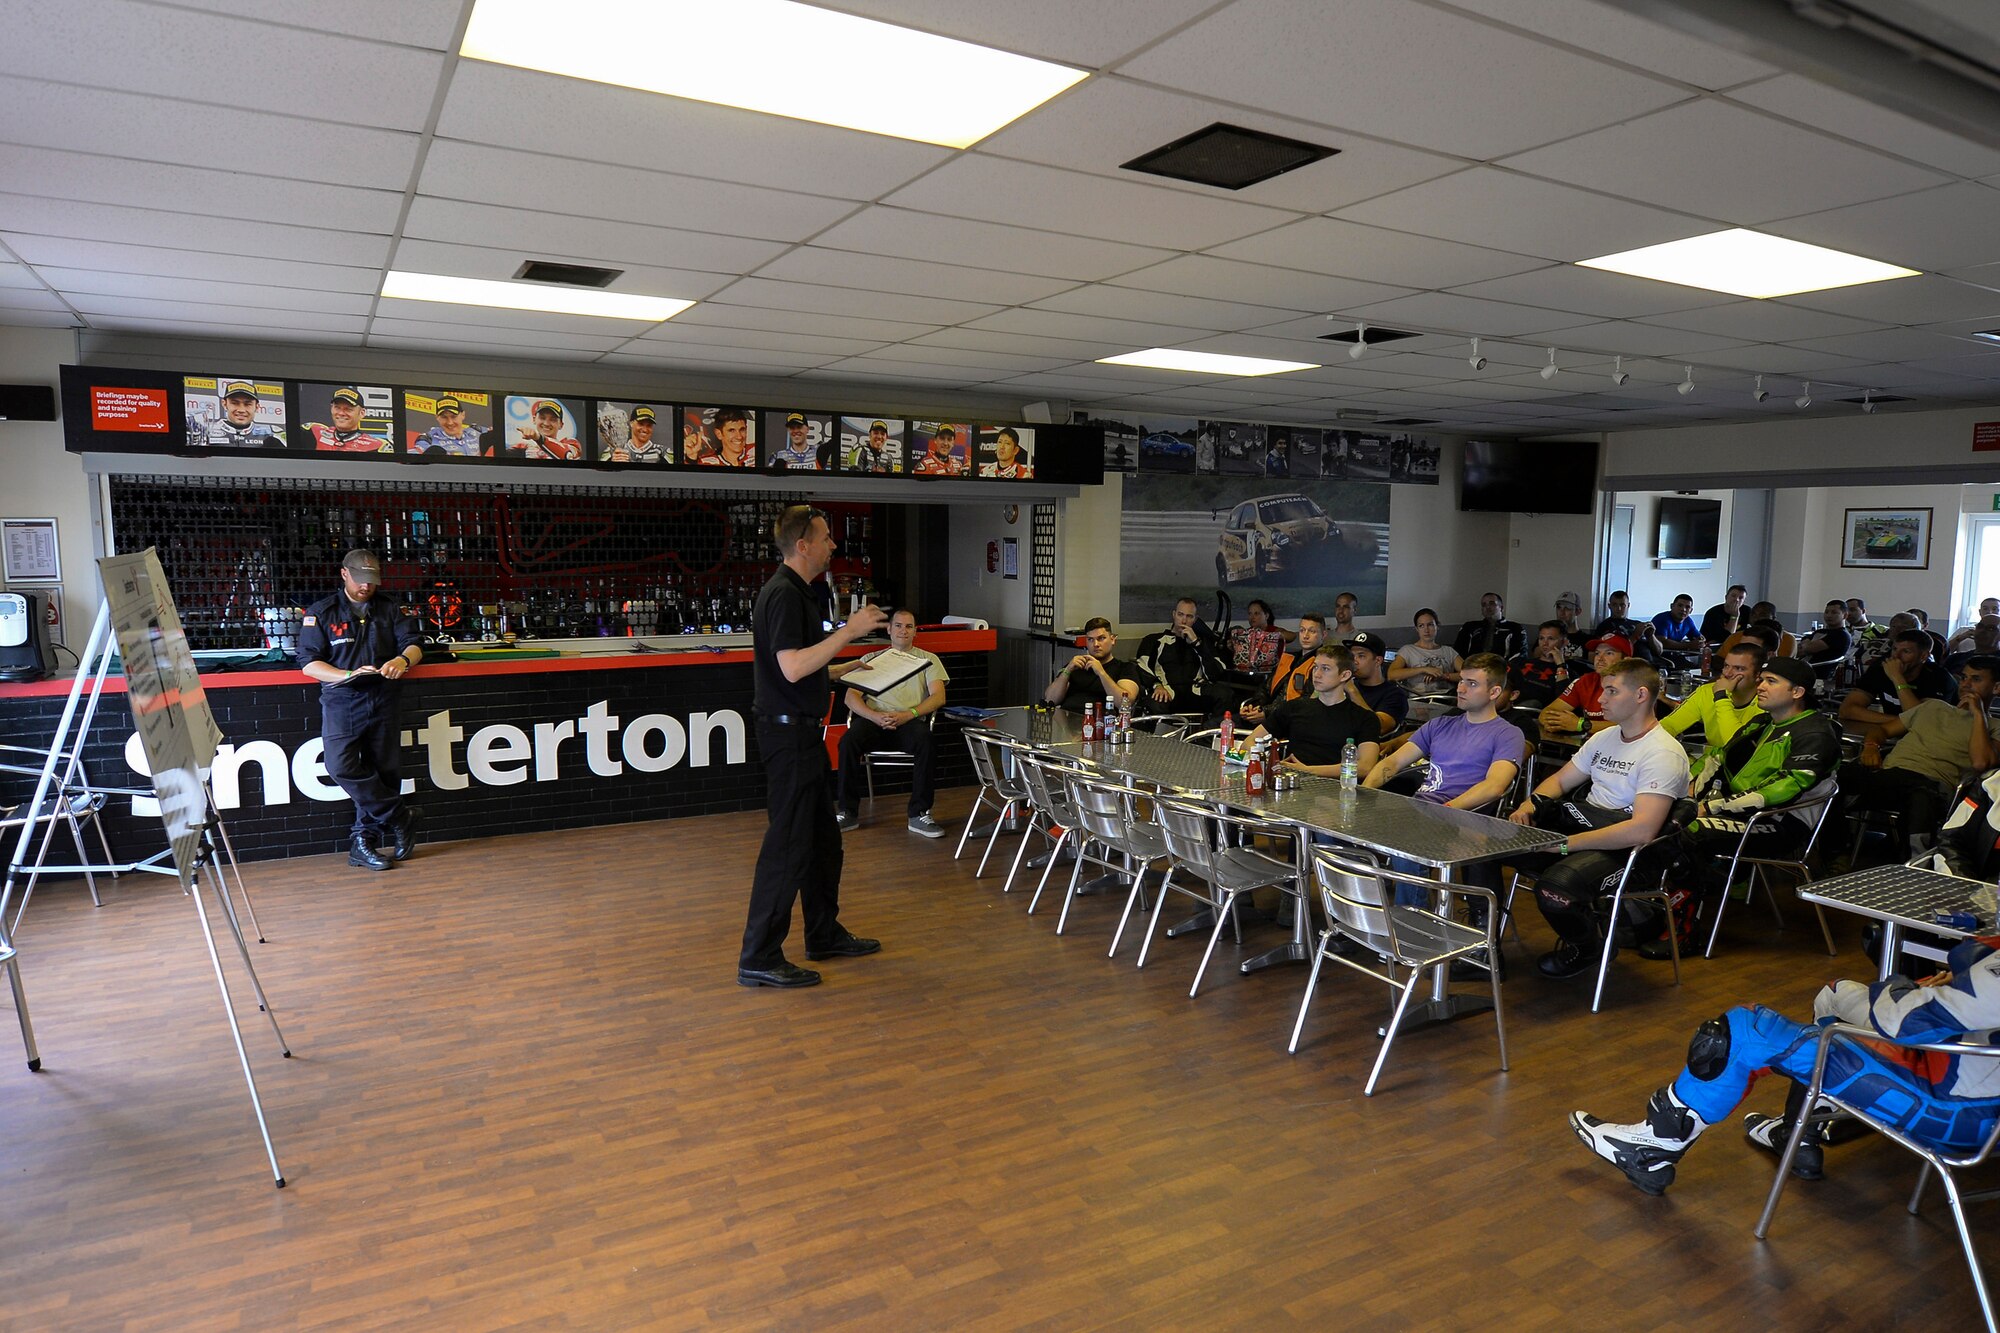 Giles Olley, Snetterton Circuit track instructor, gives a safety briefing to Military Track Day participants July 26, 2016, at Snetterton Circuit in Norwich, England. During the briefing riders were shown cornering techniques and flags used to communicate while on the track. (U.S. Air Force photo by Staff Sgt. Micaiah Anthony)